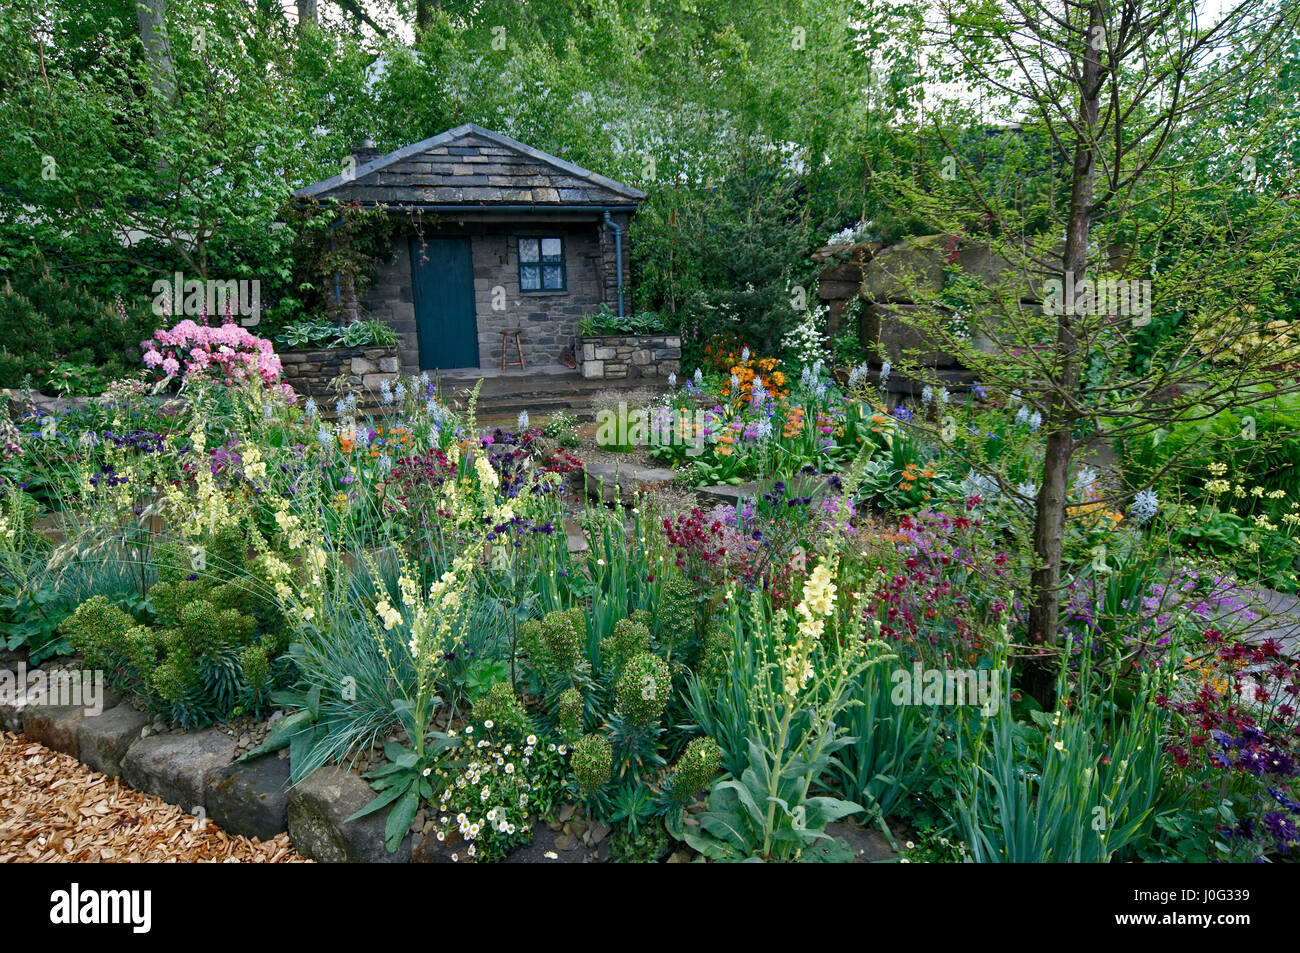 A country cottage and garden situated in a wooded rockery with a colourful display of flowers Stock Photo